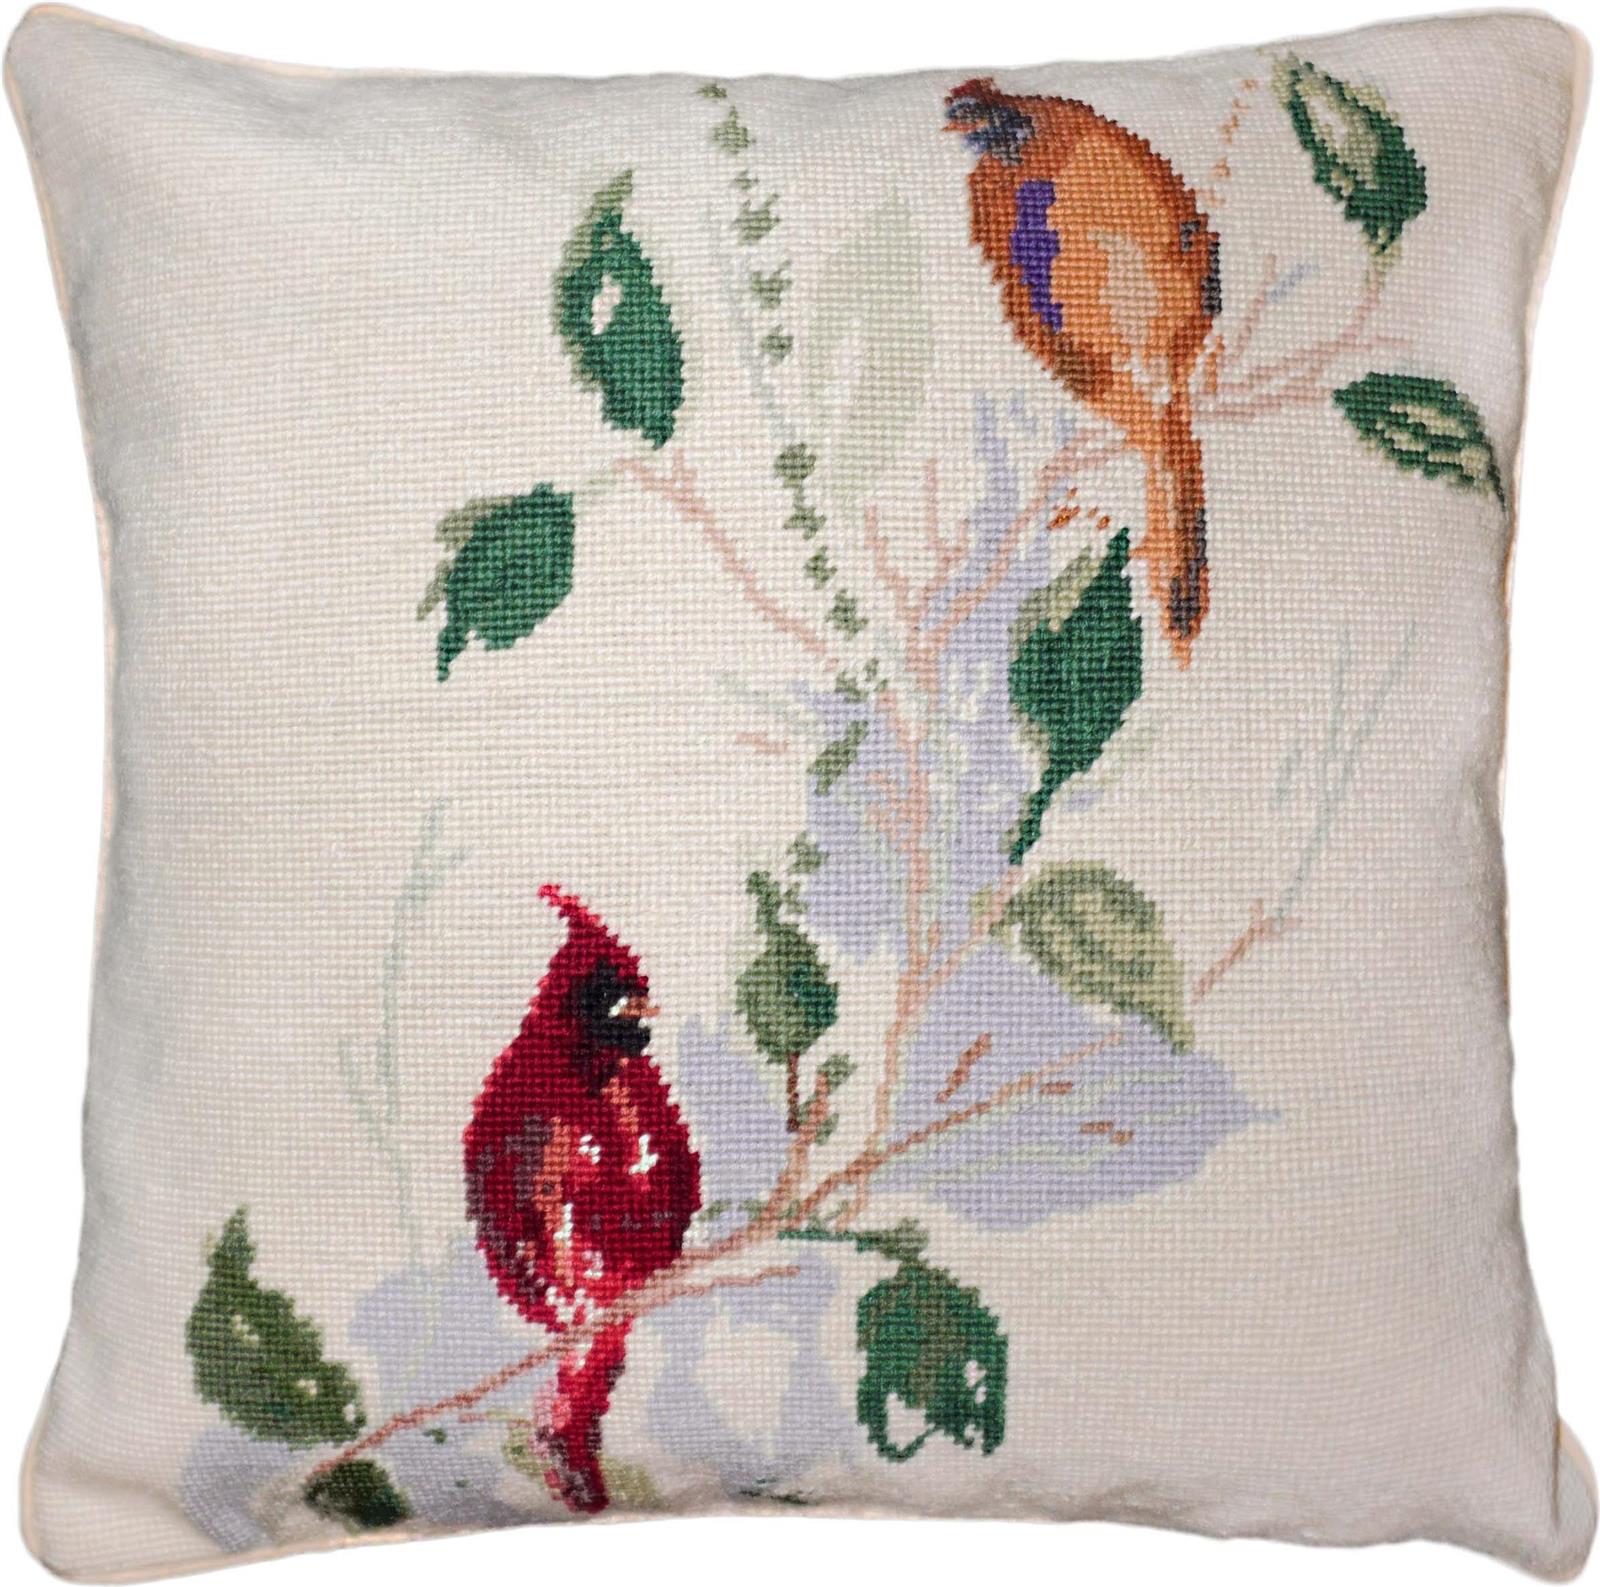 Pillow Throw Needlepoint Double Cardinals 18x18 Red Green Cotton Velvet Back-Image 1